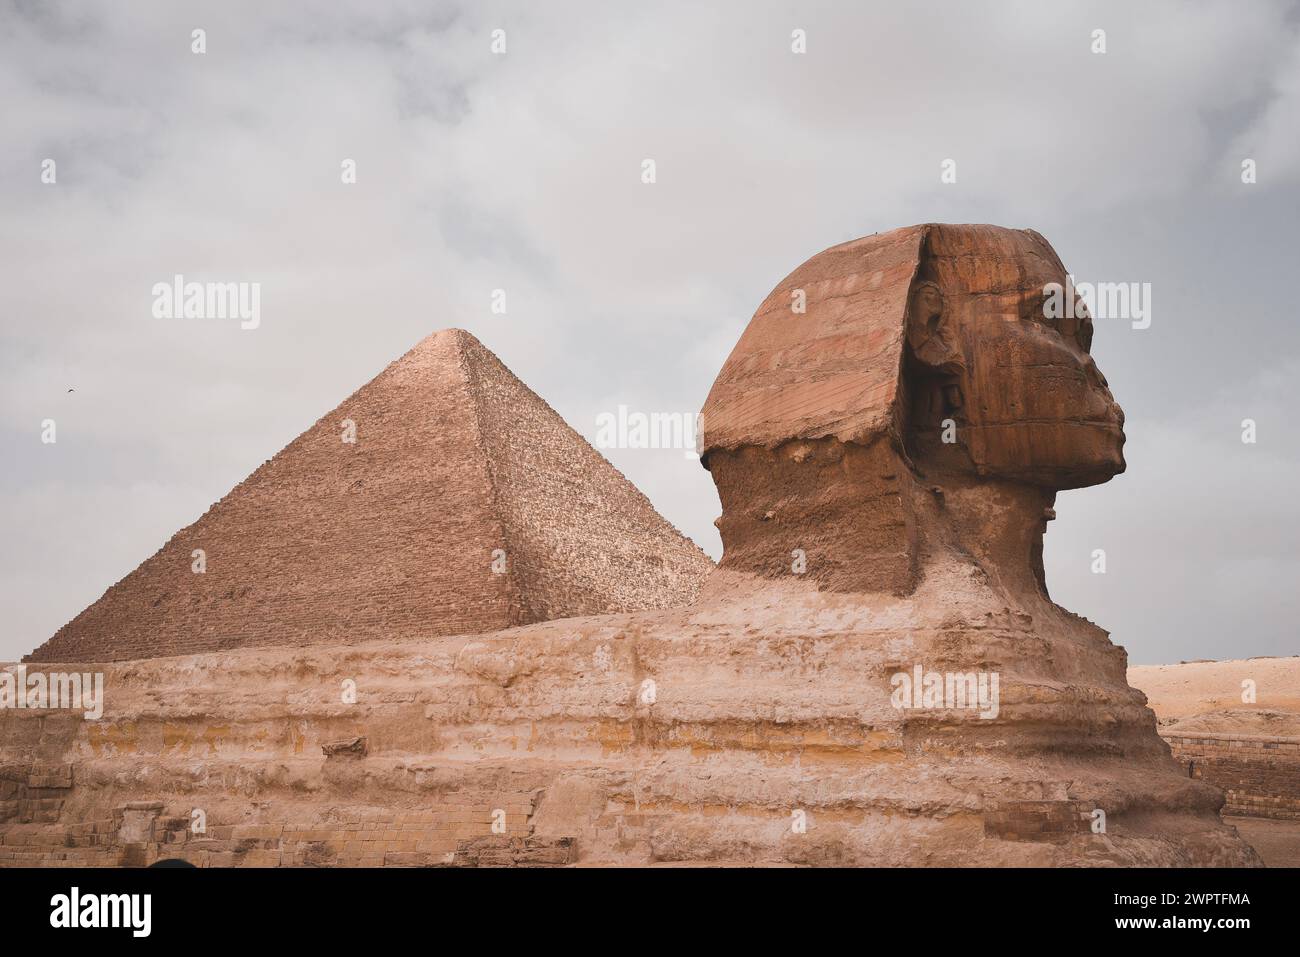 The Great Sphinx of Giza in front of the Pyramids in Giza, Egypt Stock Photo